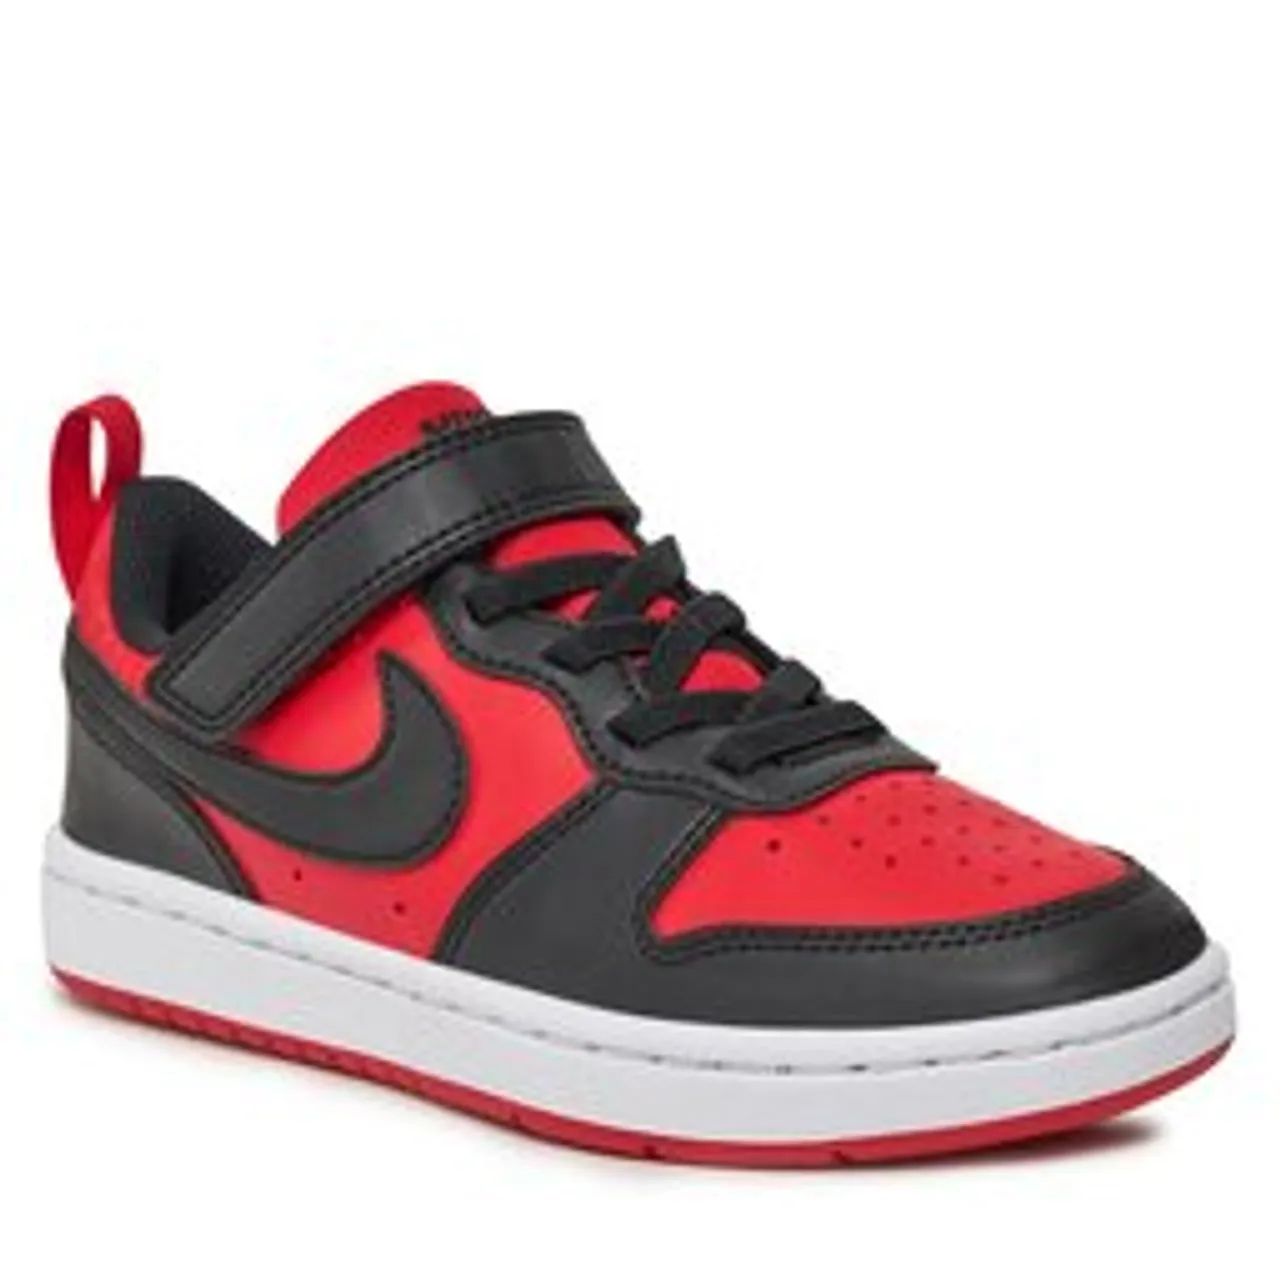 Sneakers Nike Court Borough Low Recraft (PS) DV5457 600 Rot